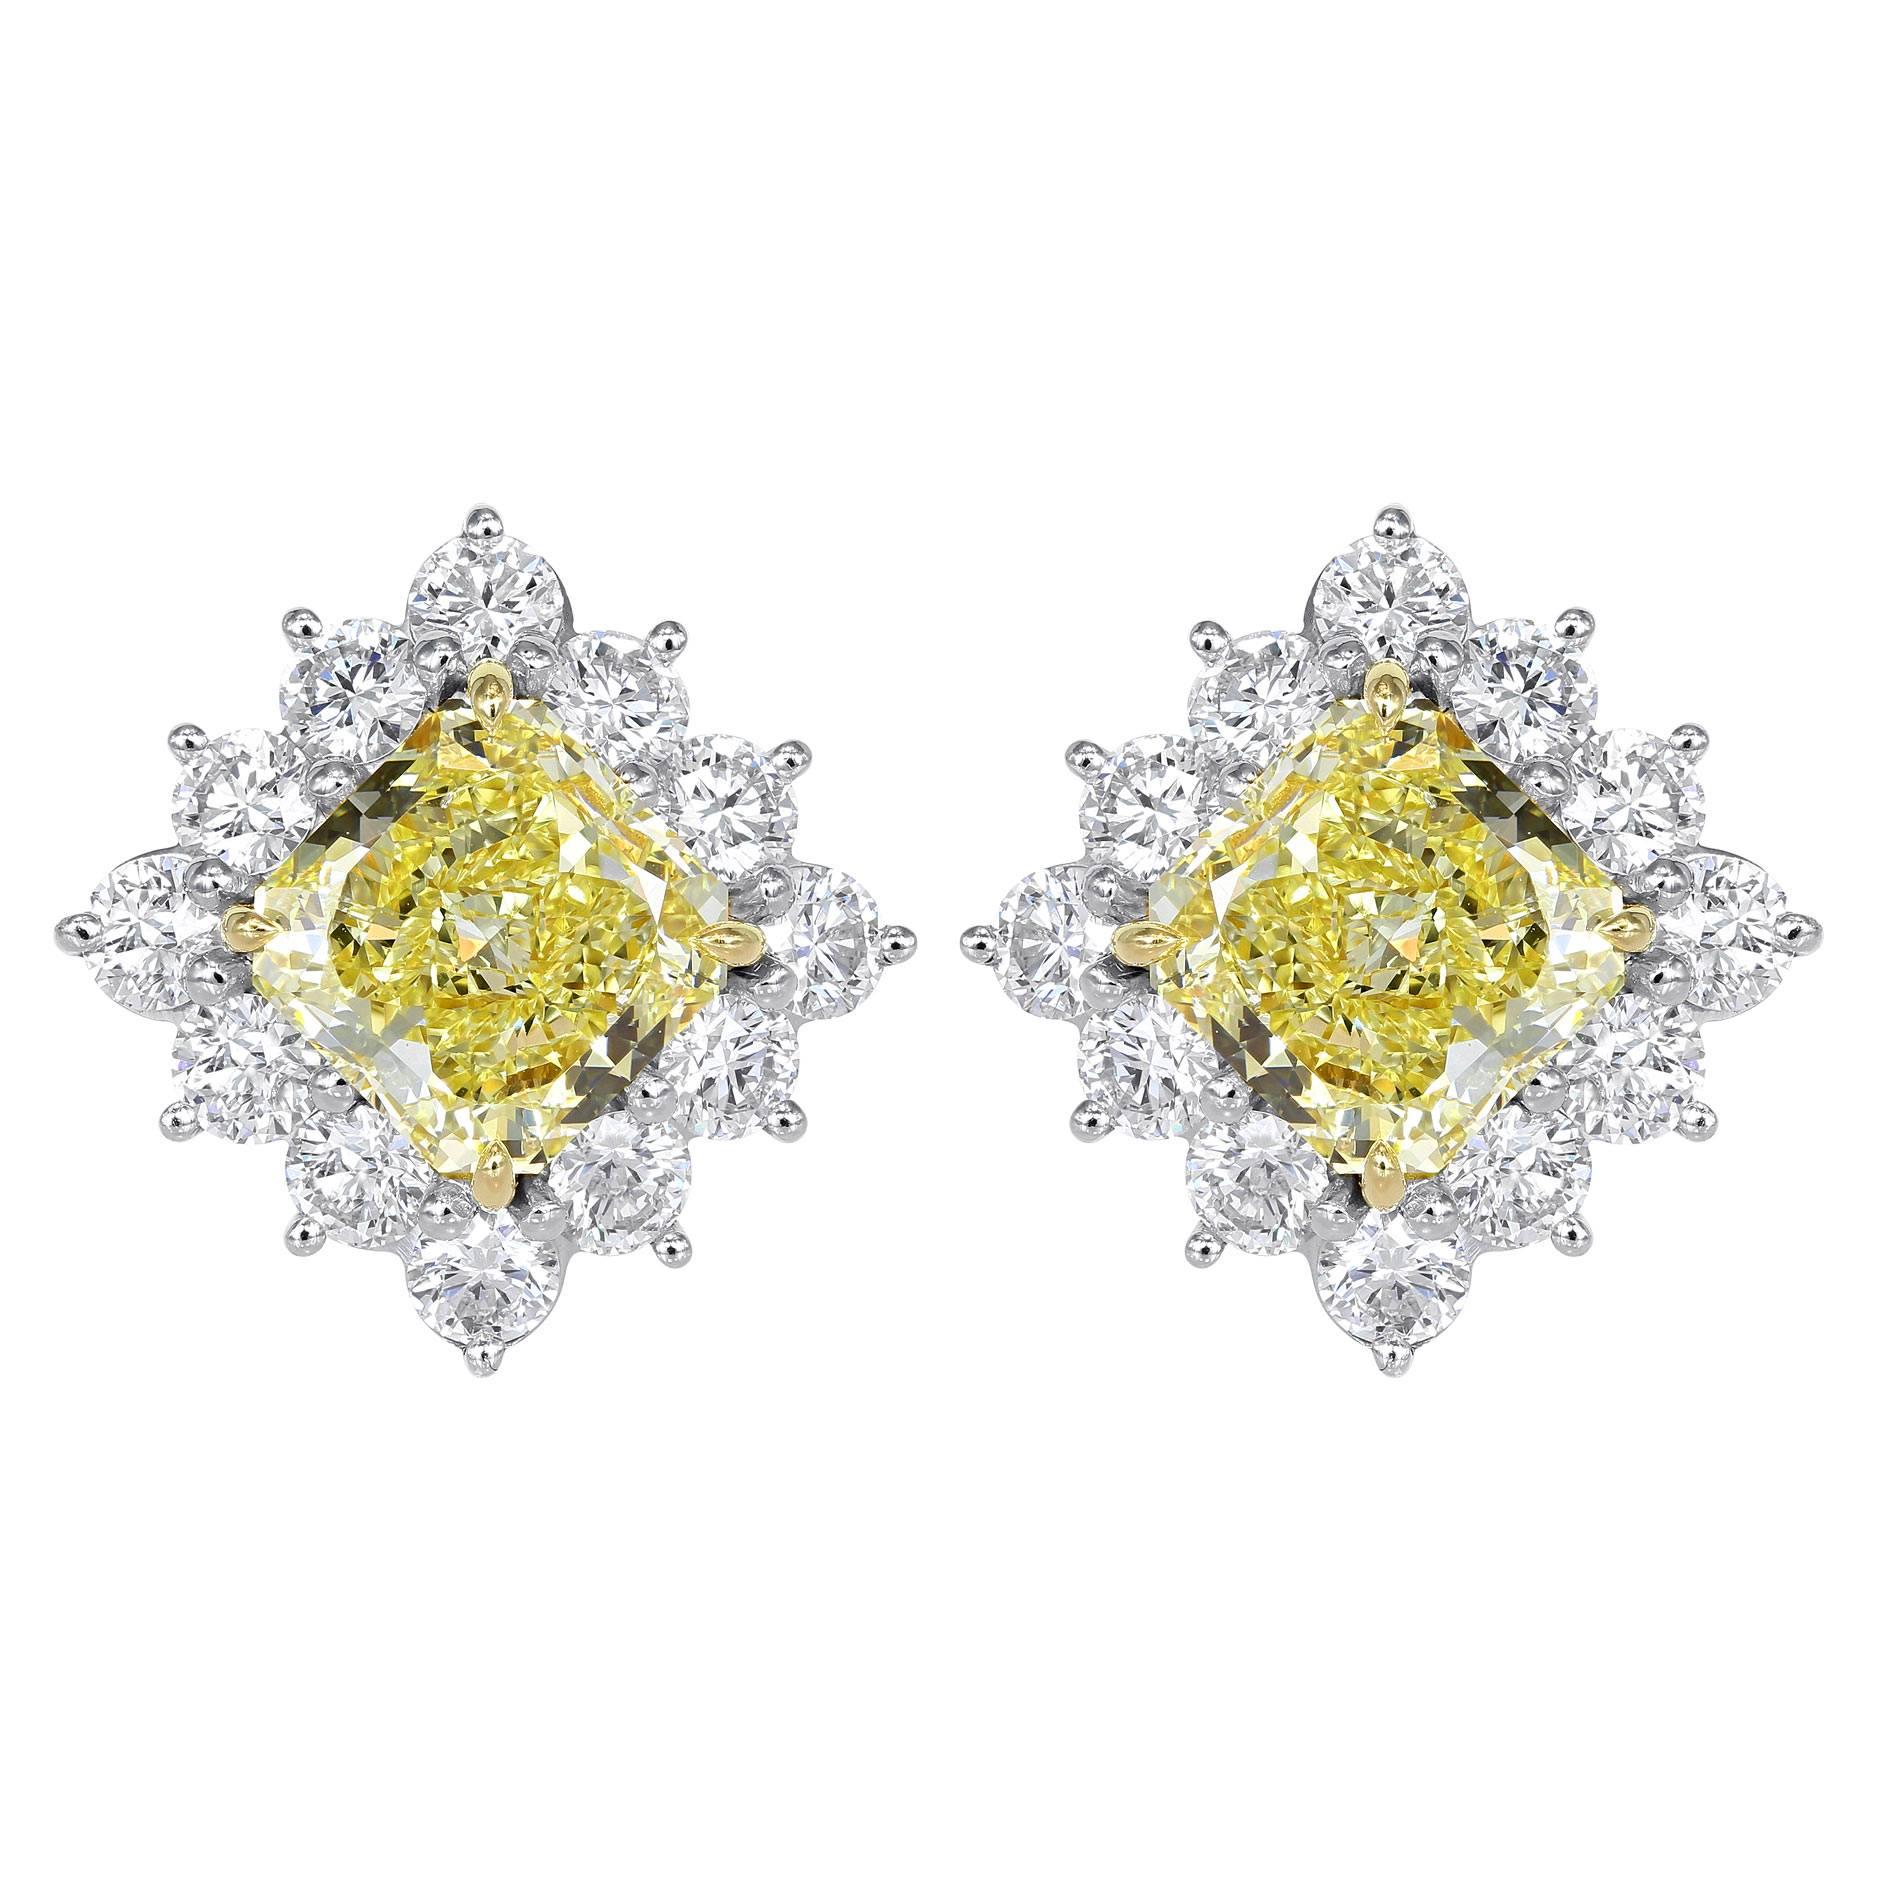 5.02 Carat GIA Certified Canary and White Diamond Stud Earrings For Sale